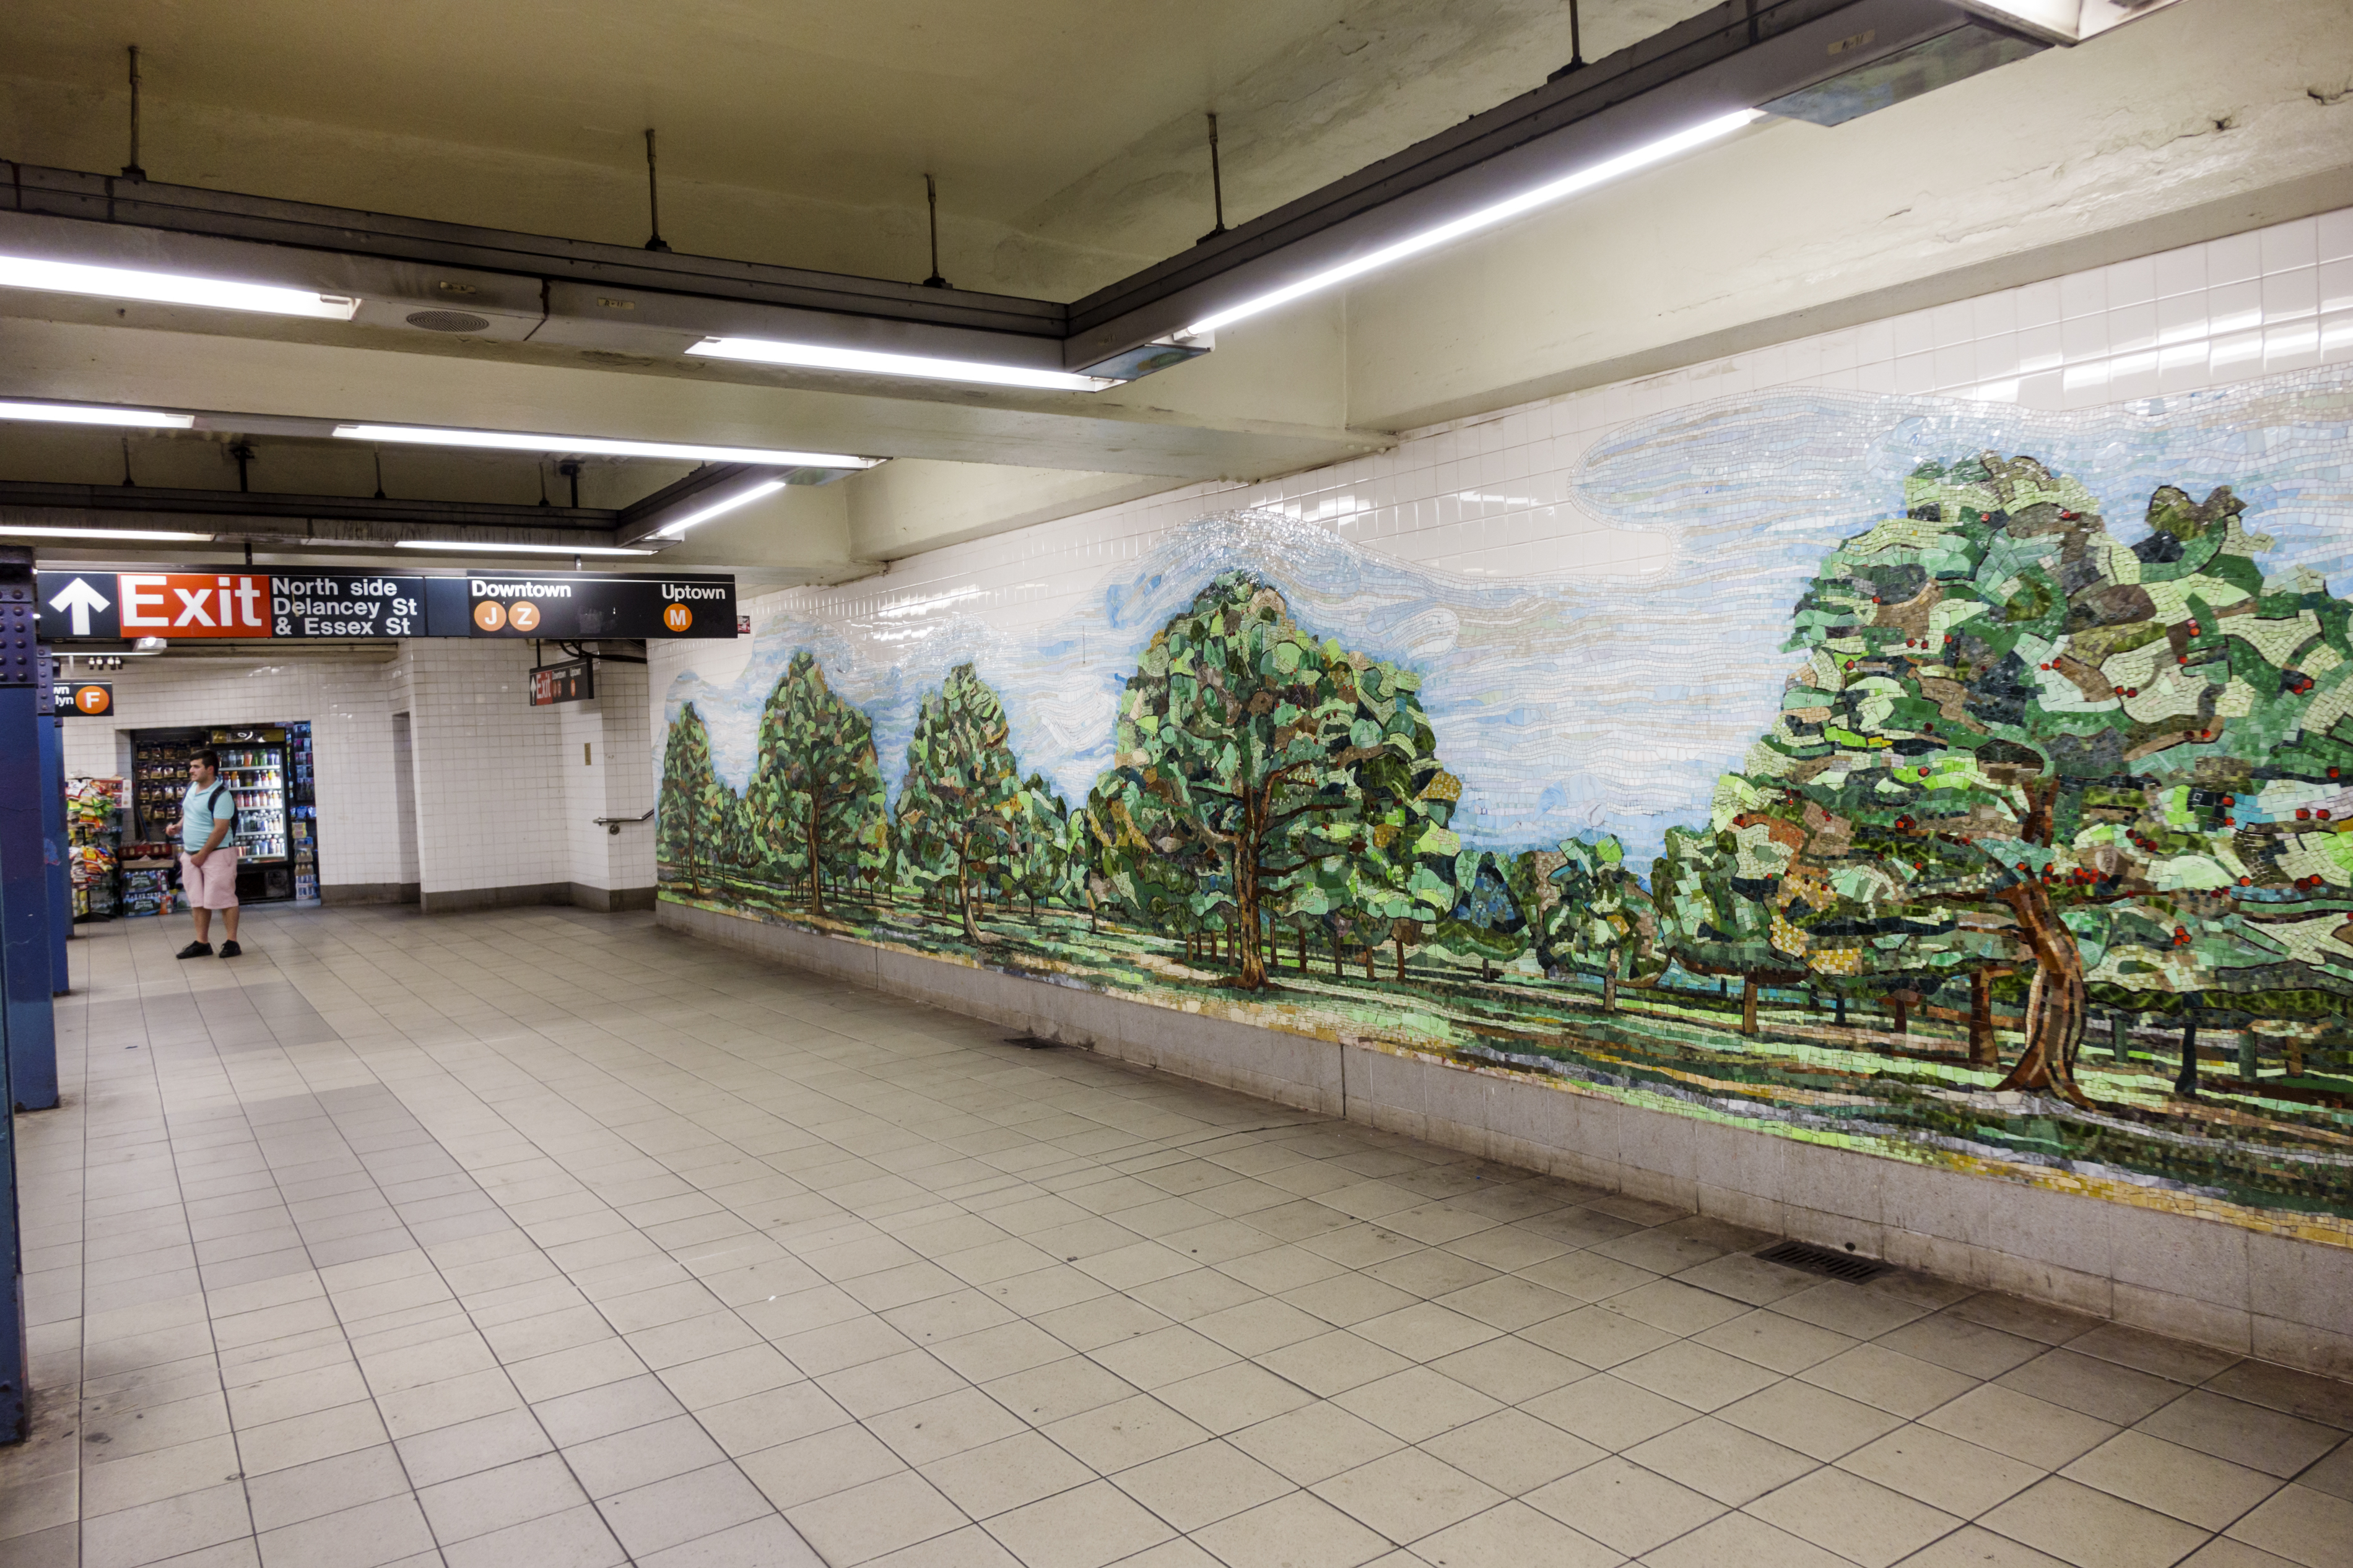 Person stands in a subway station with a mosaic artwork of trees on the wall. Exit sign visible